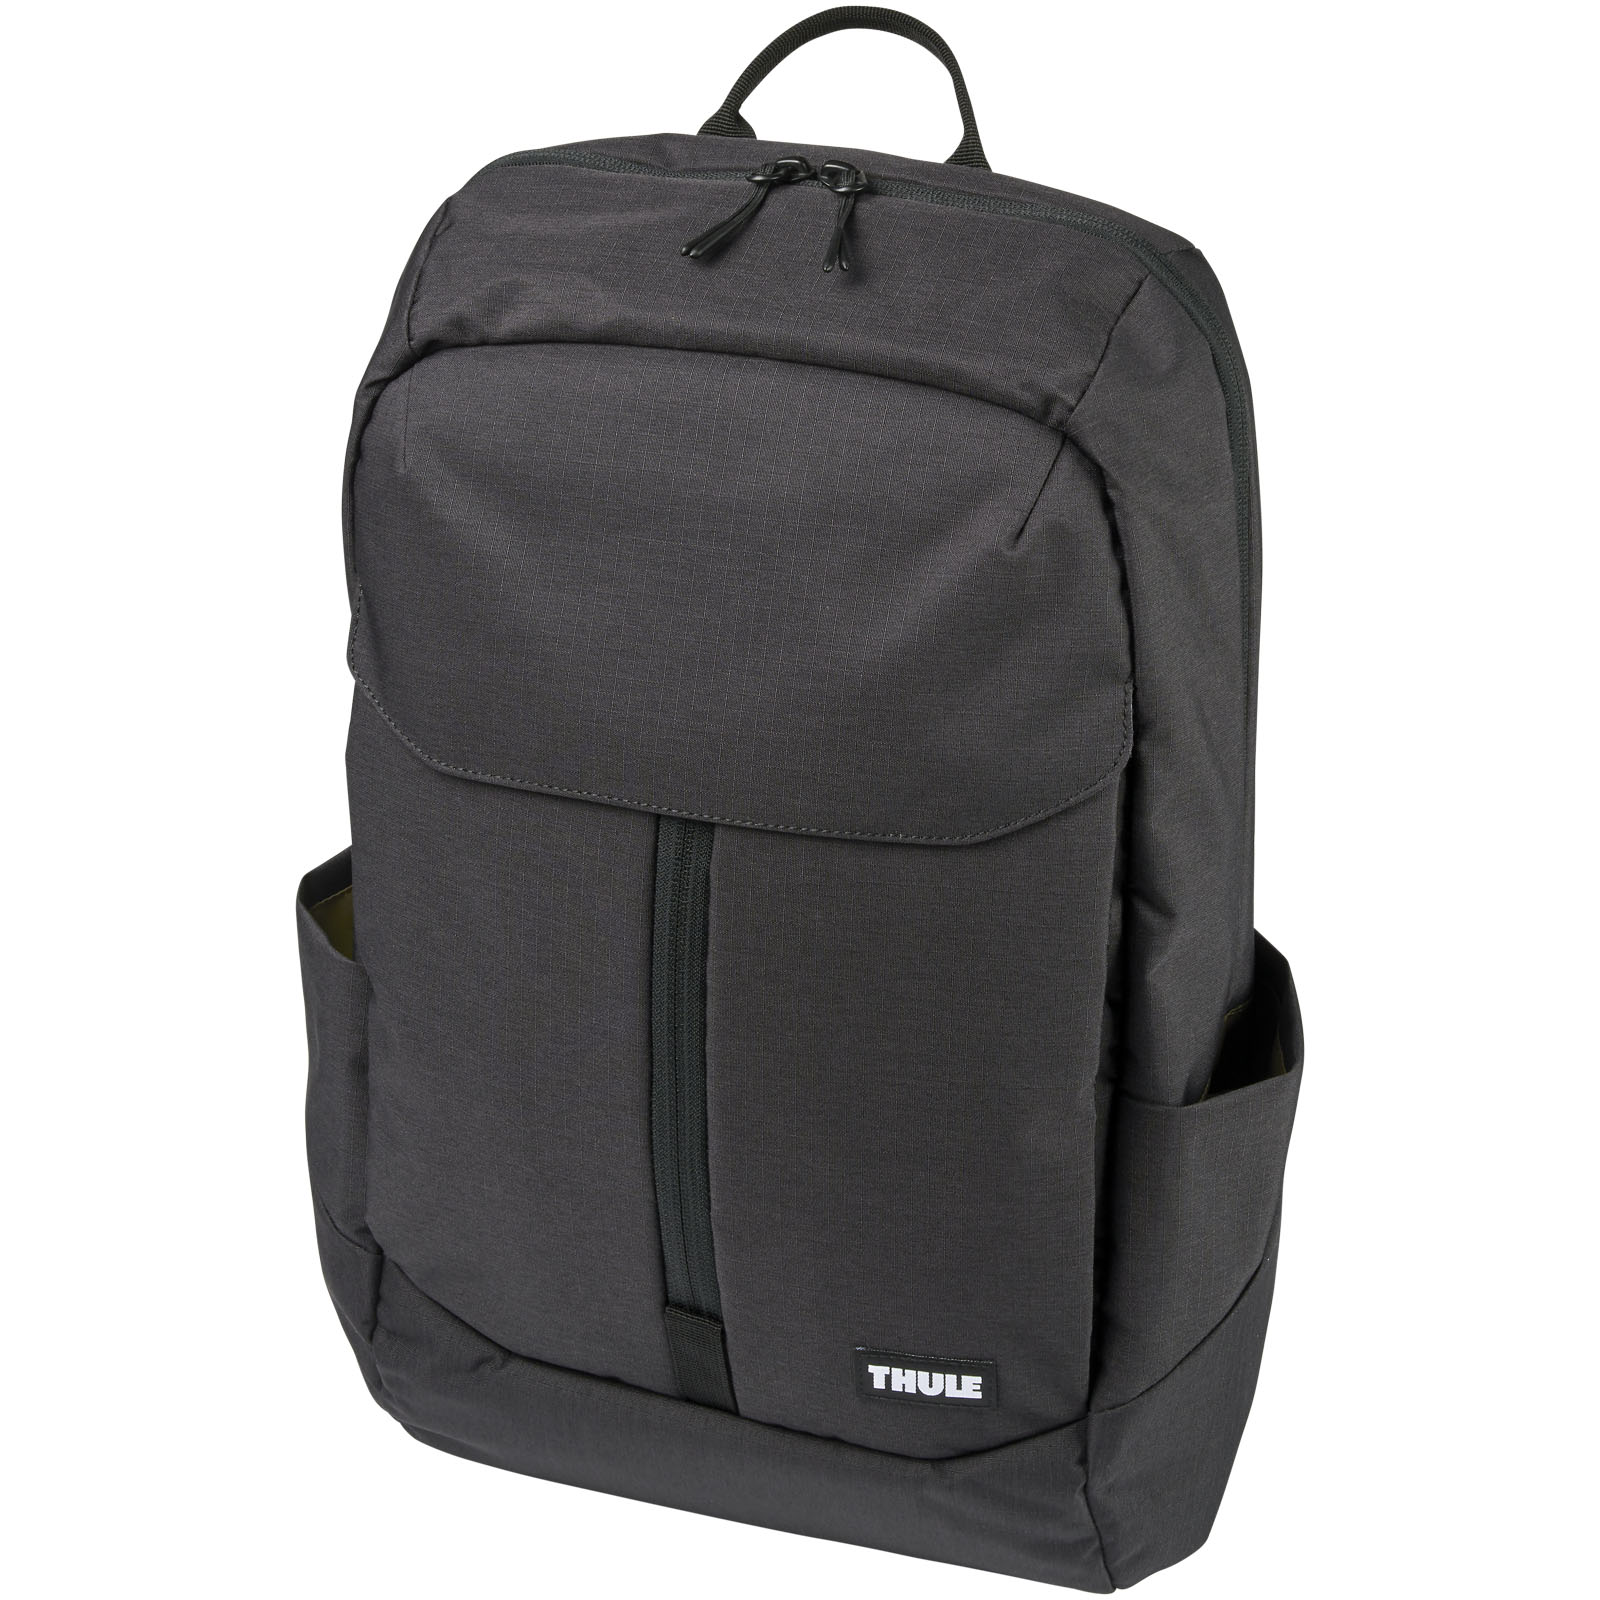 A large laptop backpack with a zipper from Stanford-le-Hope - Elgin